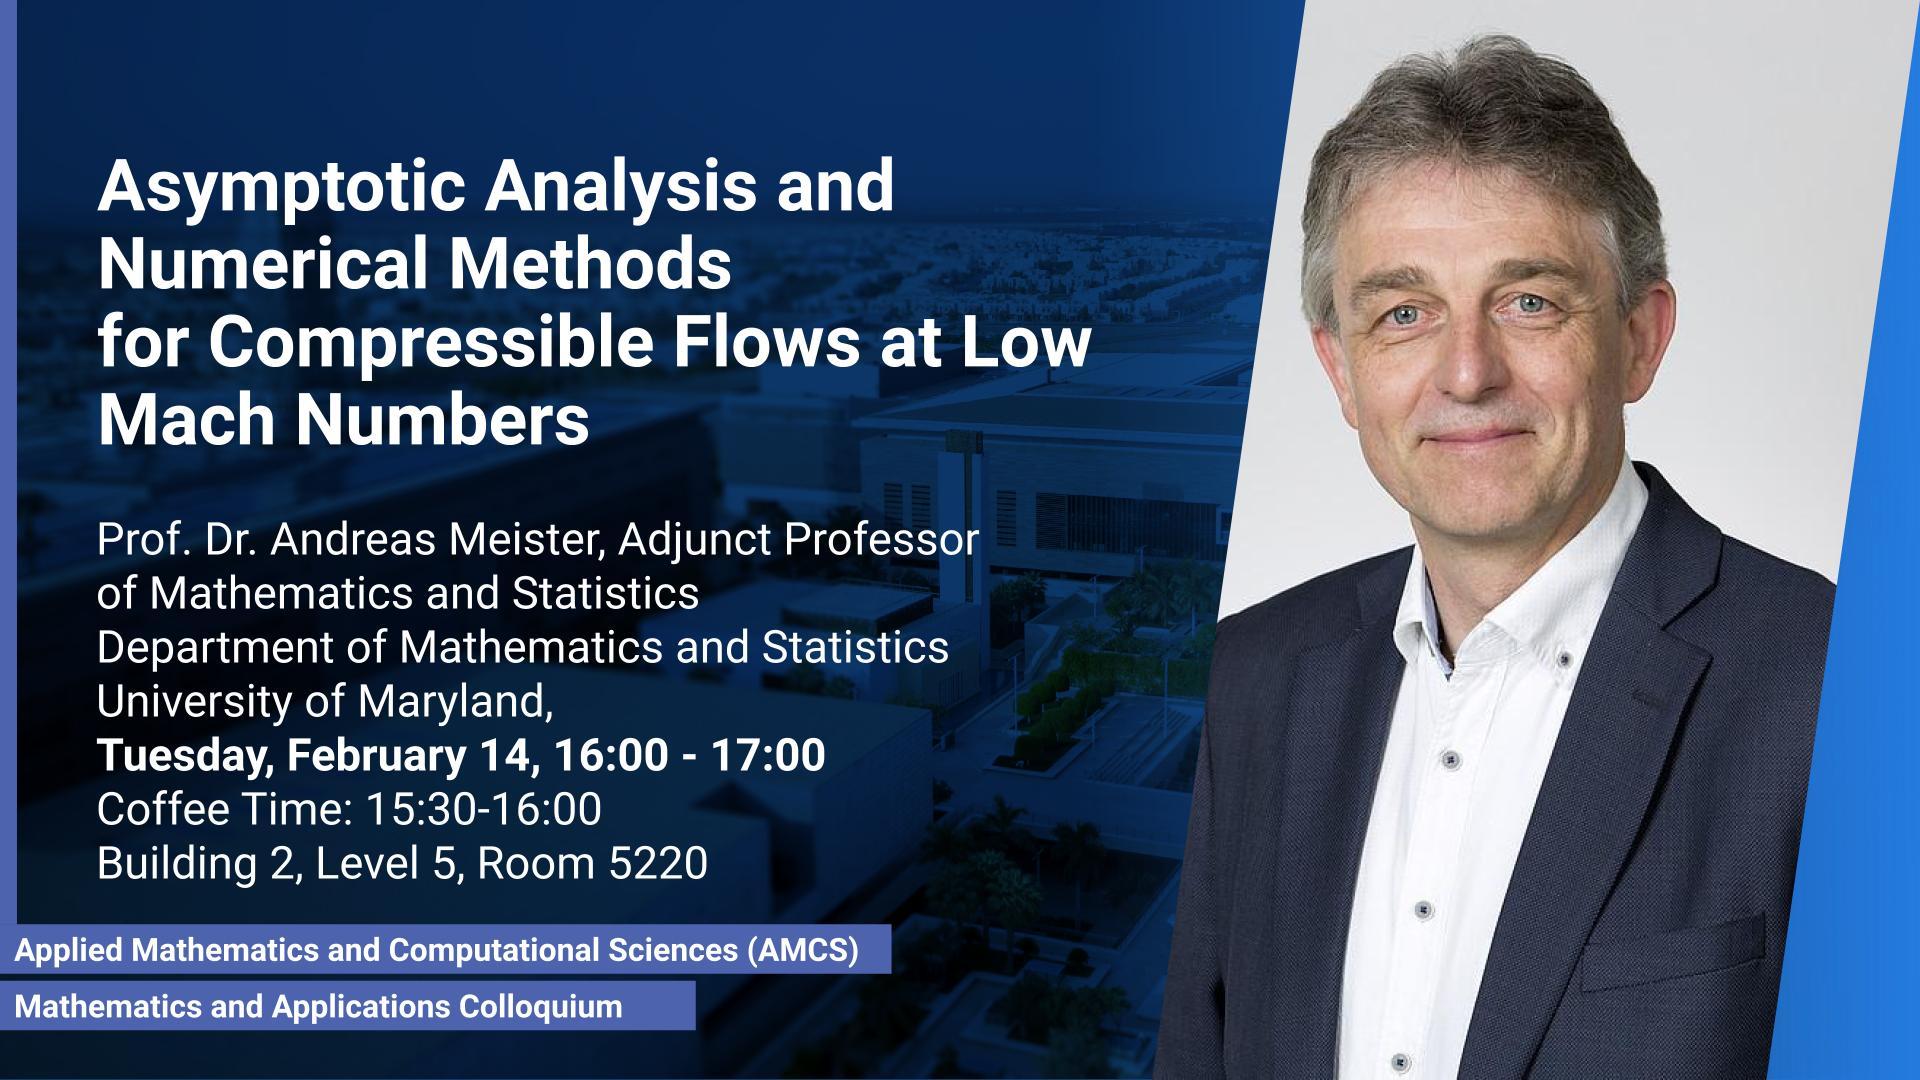 KAUST-CEMSE-AMCS-Mathematics-Seminar-Andreas-Meister-Asymptotic-Analysis-Numerical-Compressible.